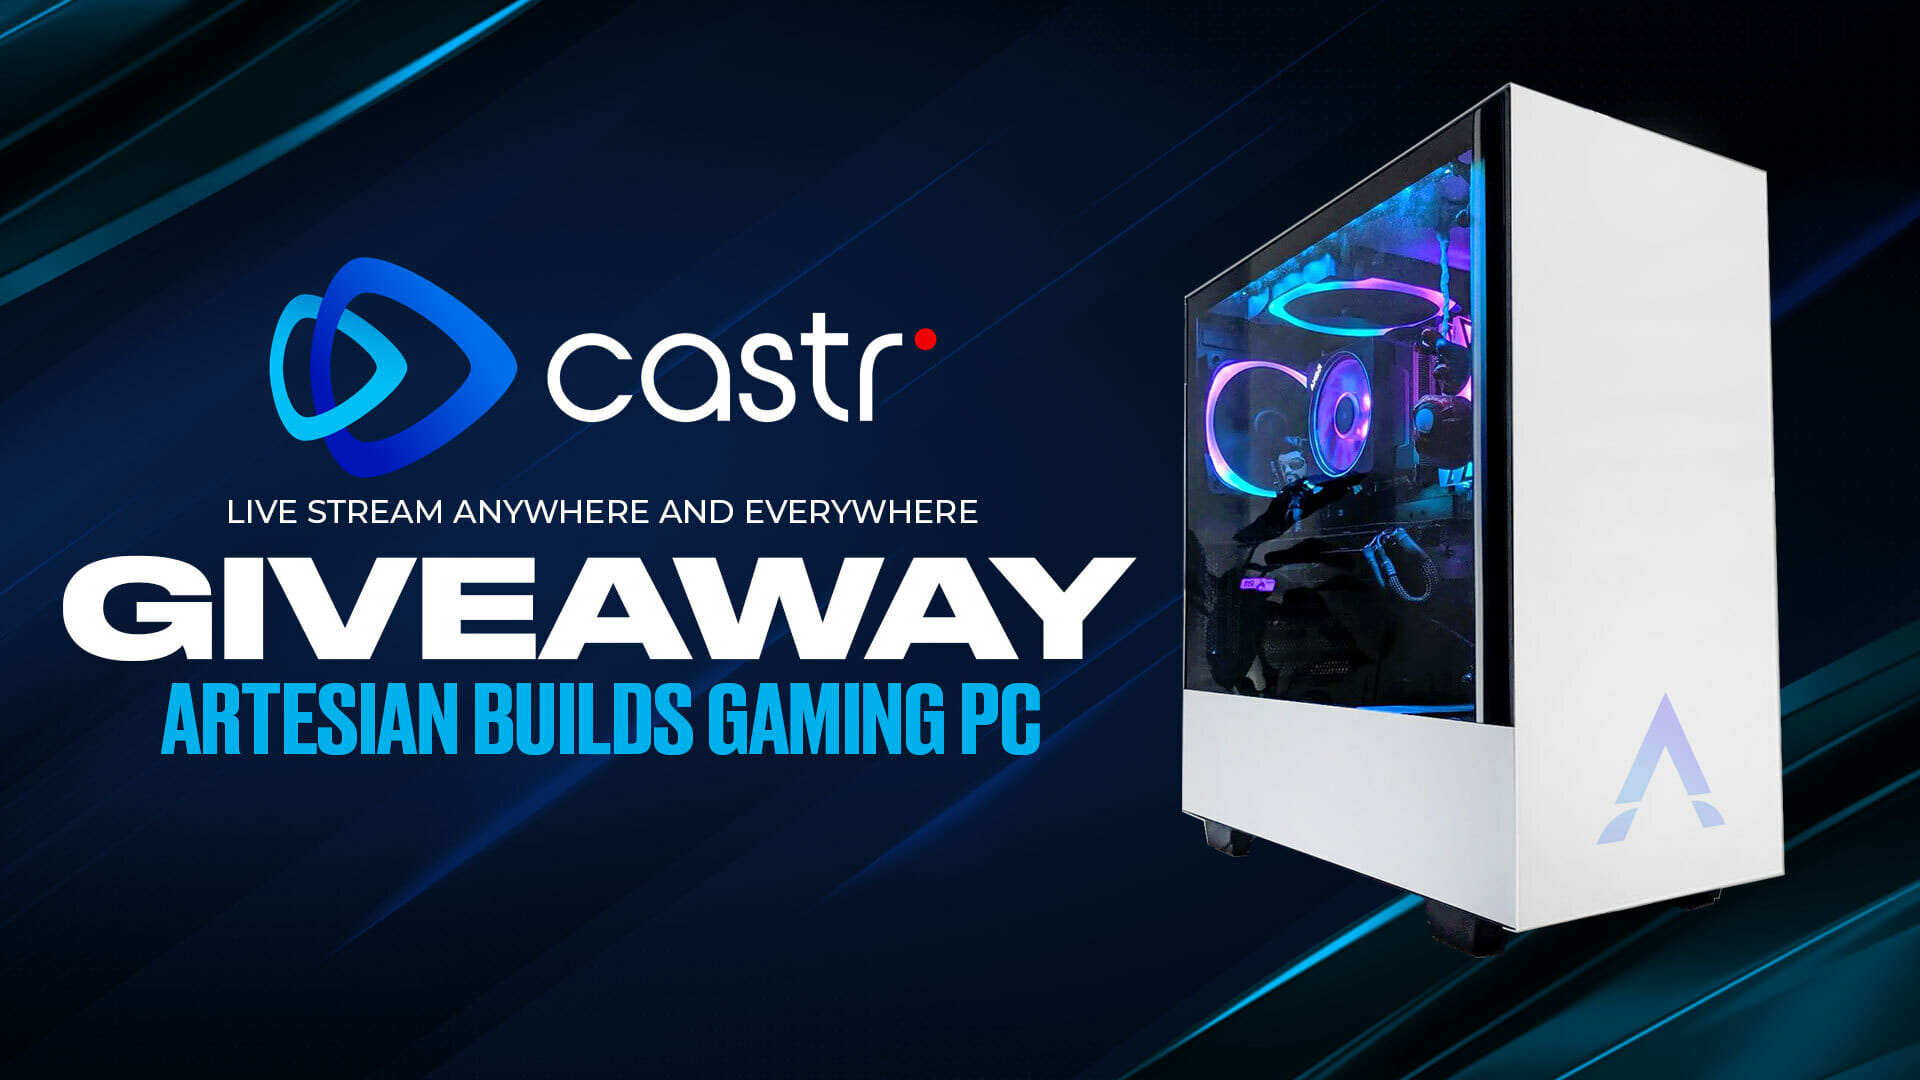 Castr-Artesian-Builds-Gaming-PC-Giveaway